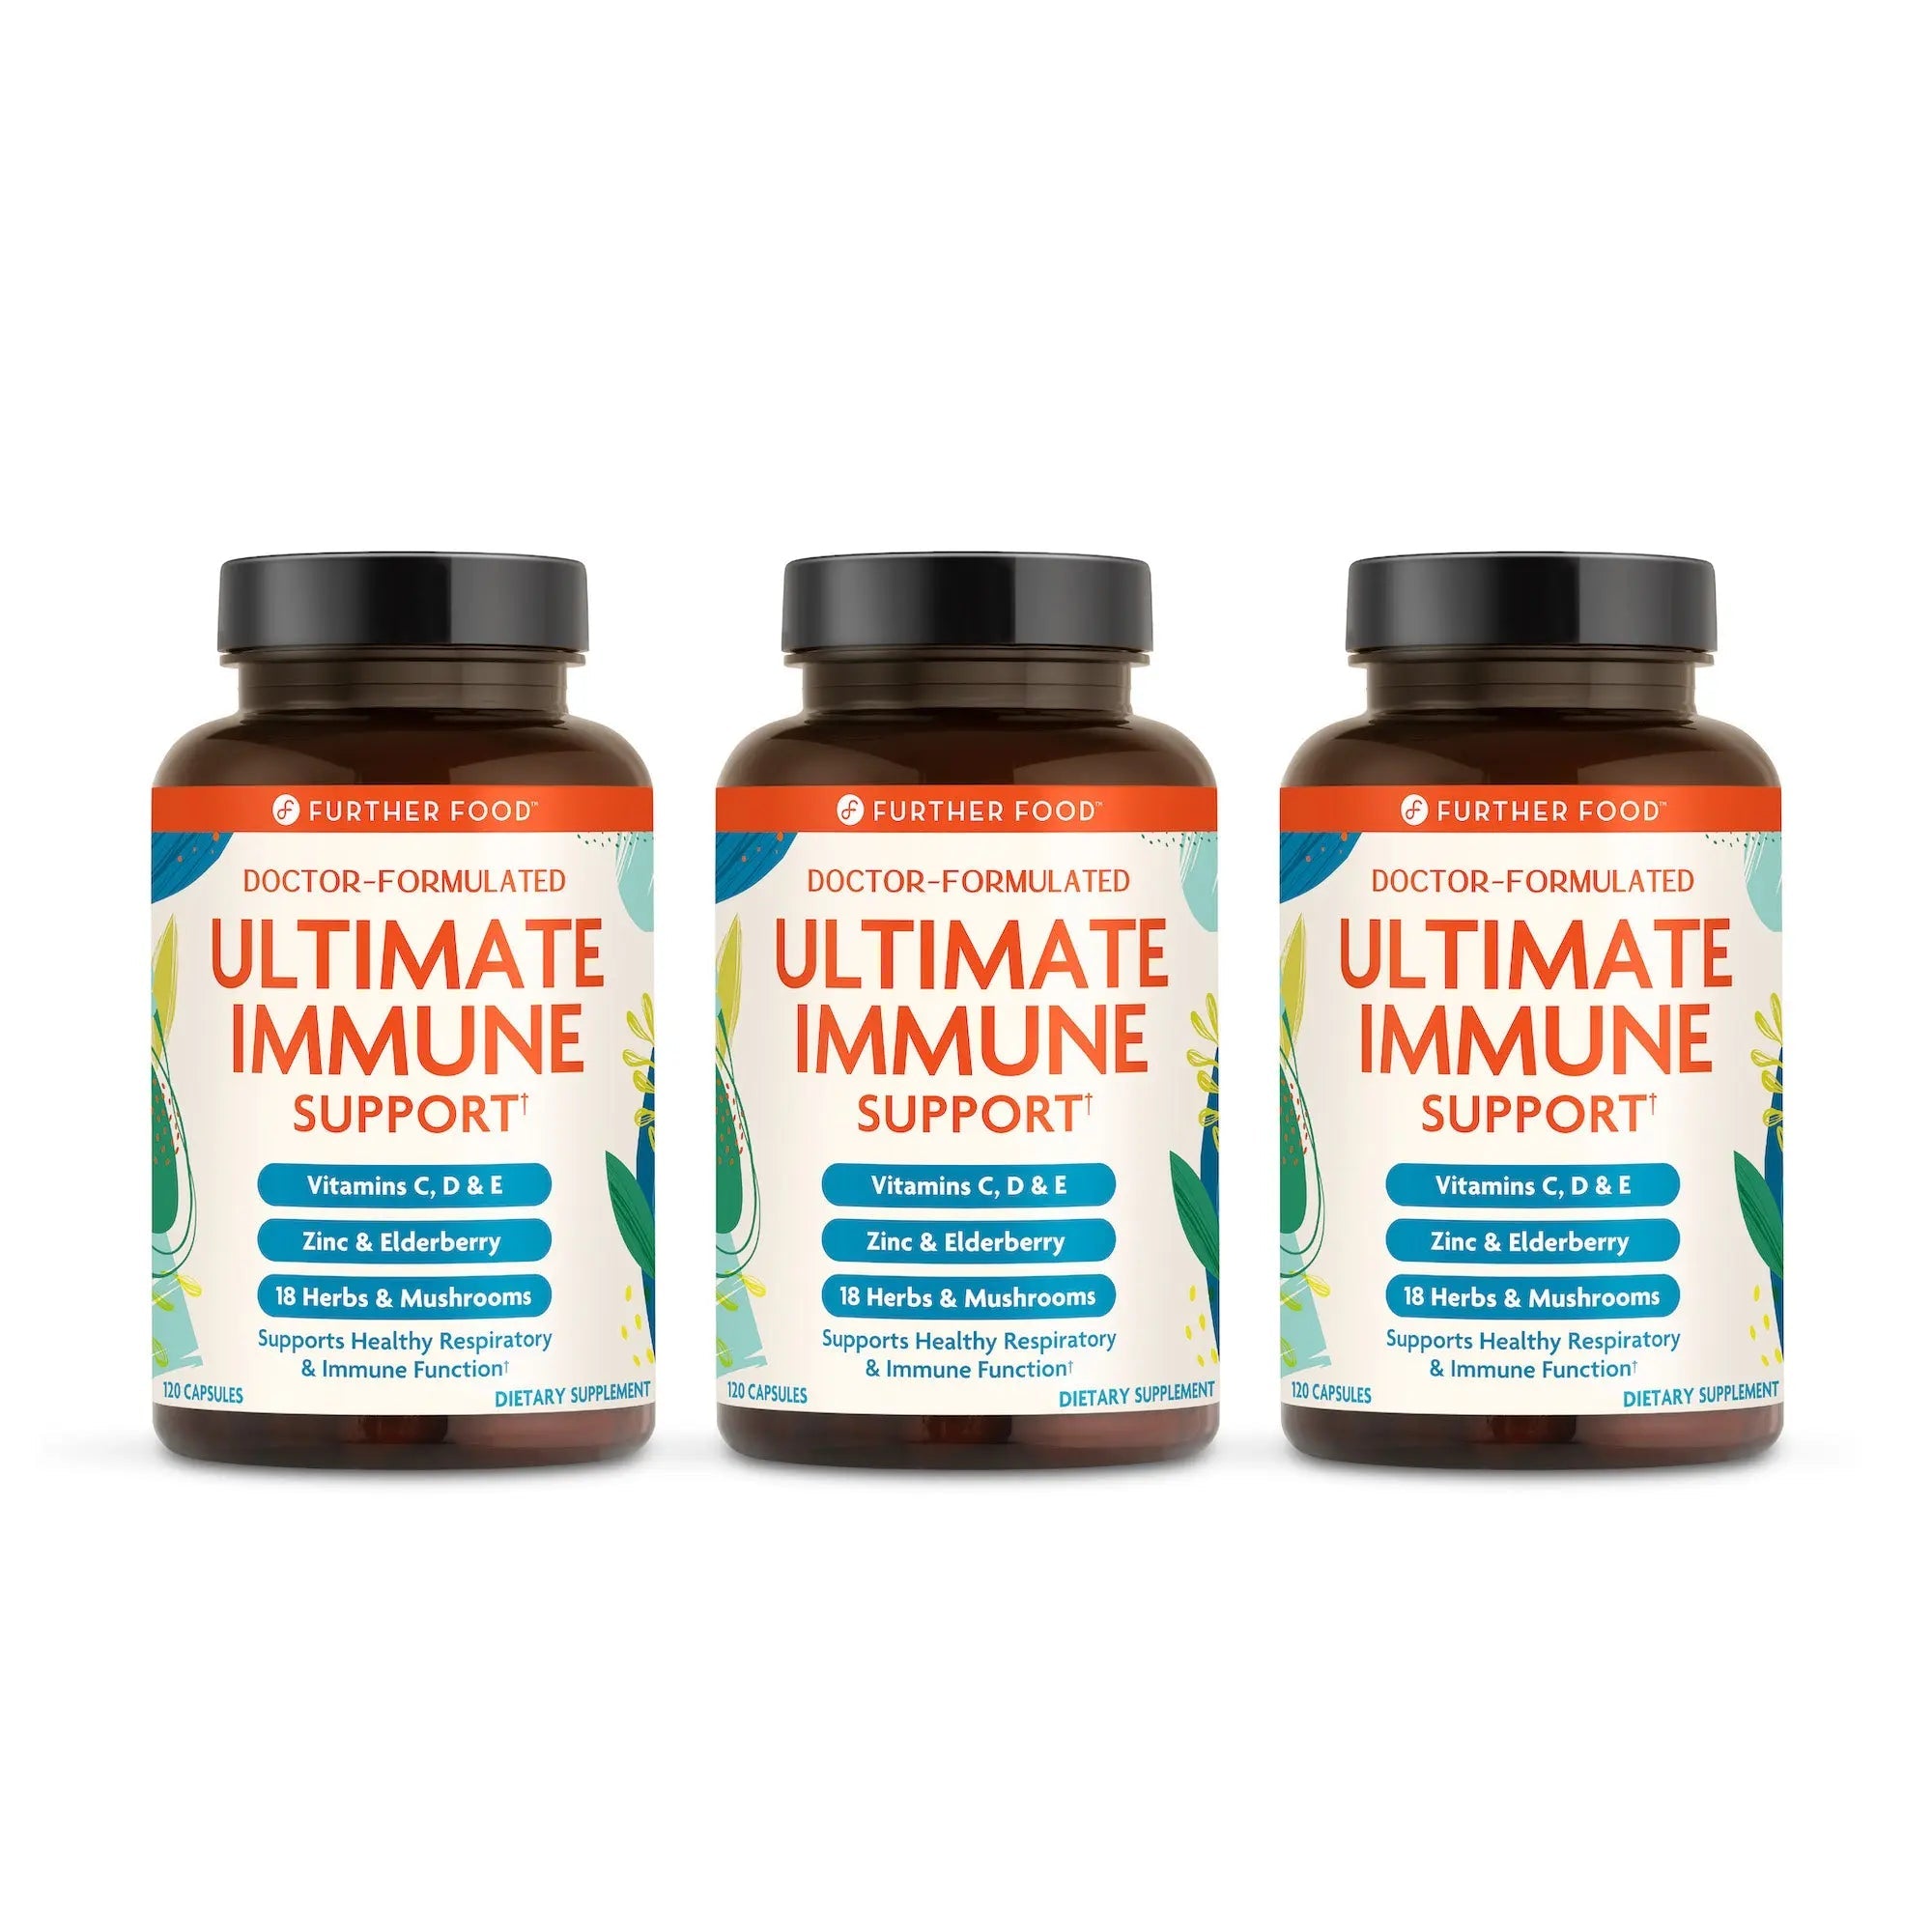 This all-in-one doctor-formulated immune support supplement